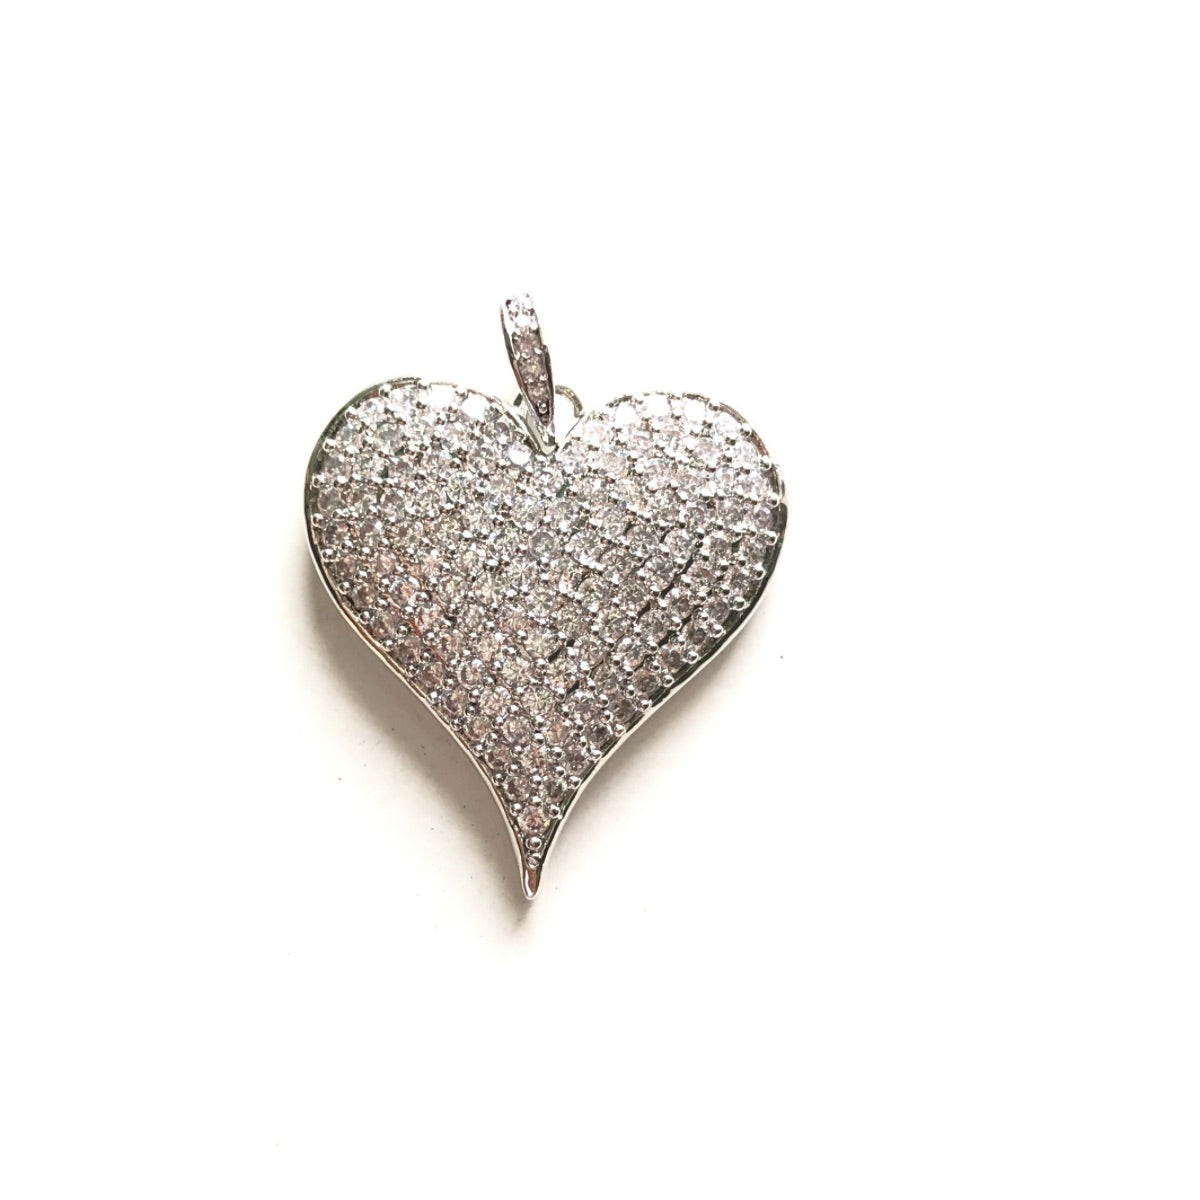 10pcs/lot 30*23mm CZ Paved Heart Charms Silver CZ Paved Charms Hearts Charms Beads Beyond